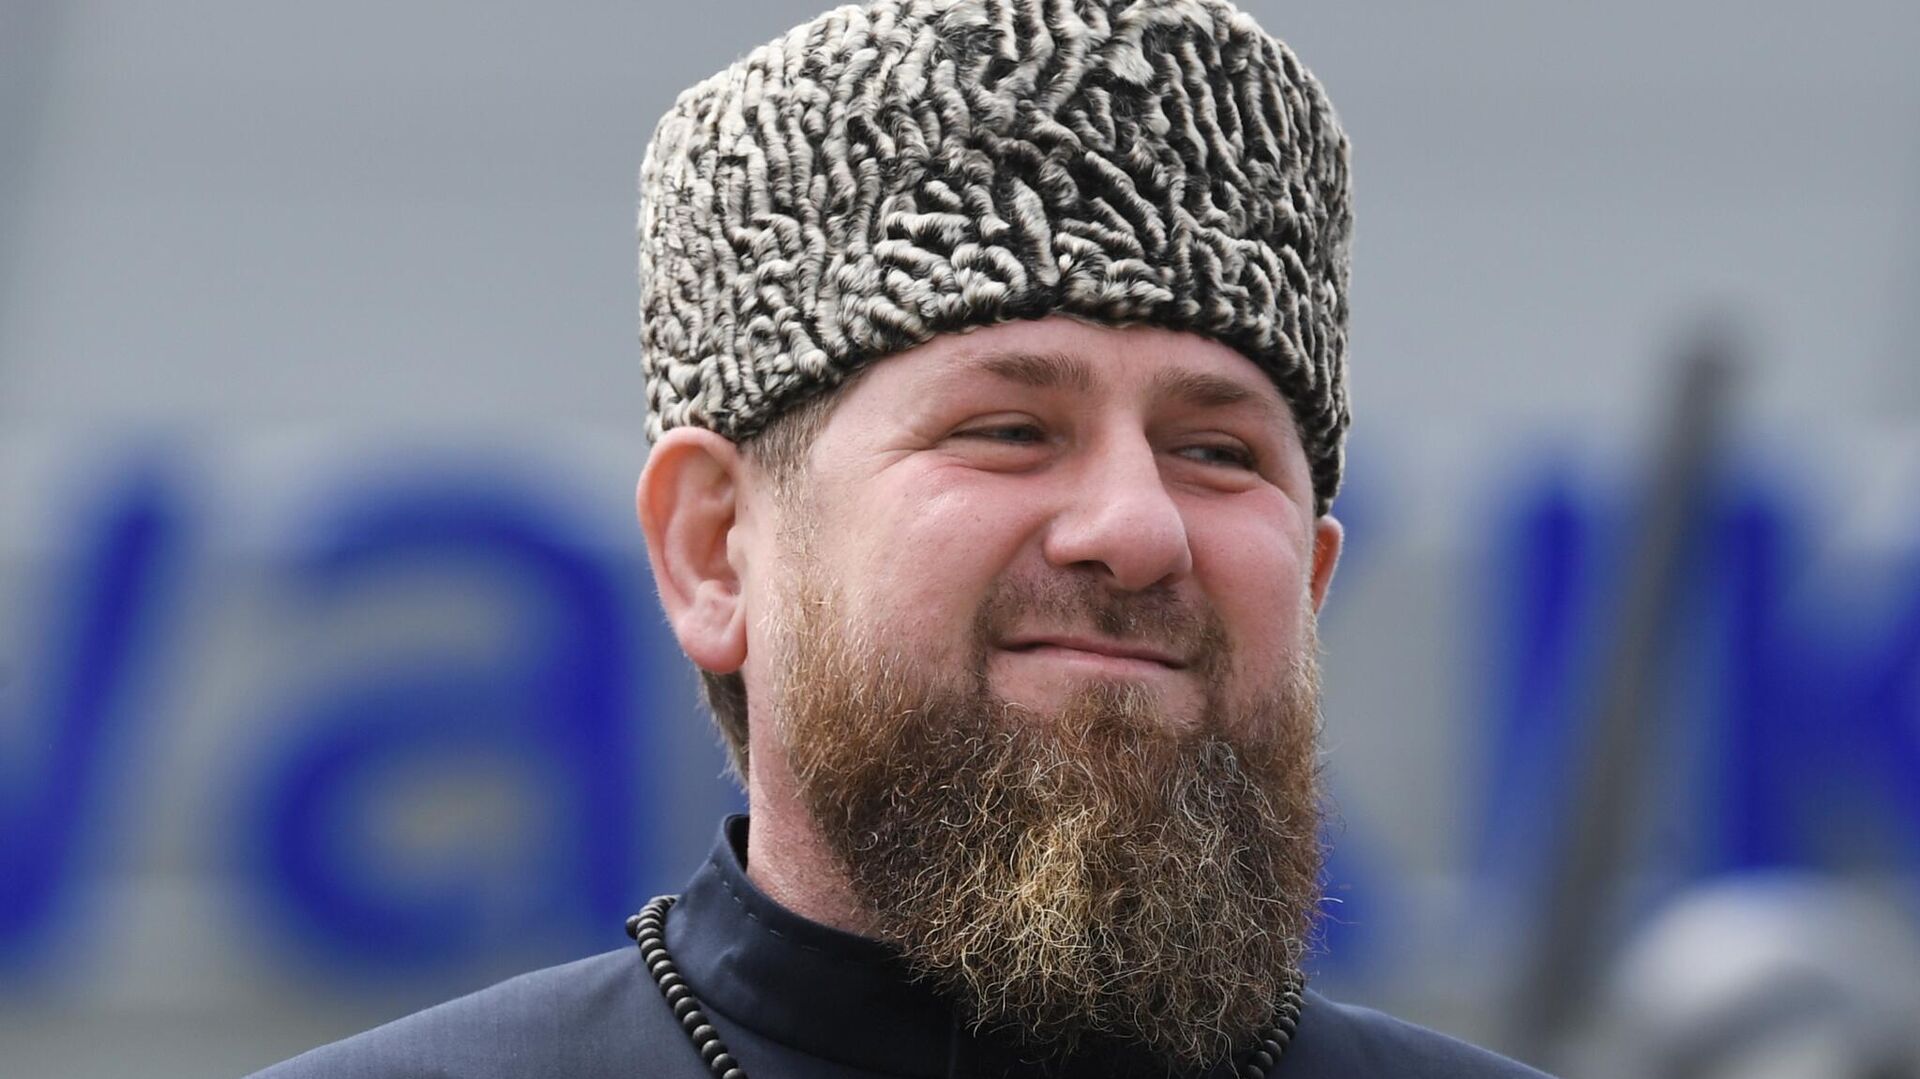 Head of the Chechen Republic Ramzan Kadyrov at a military parade dedicated to the 77th anniversary of victory in the Great Patriotic War in Grozny. - Sputnik International, 1920, 23.05.2022